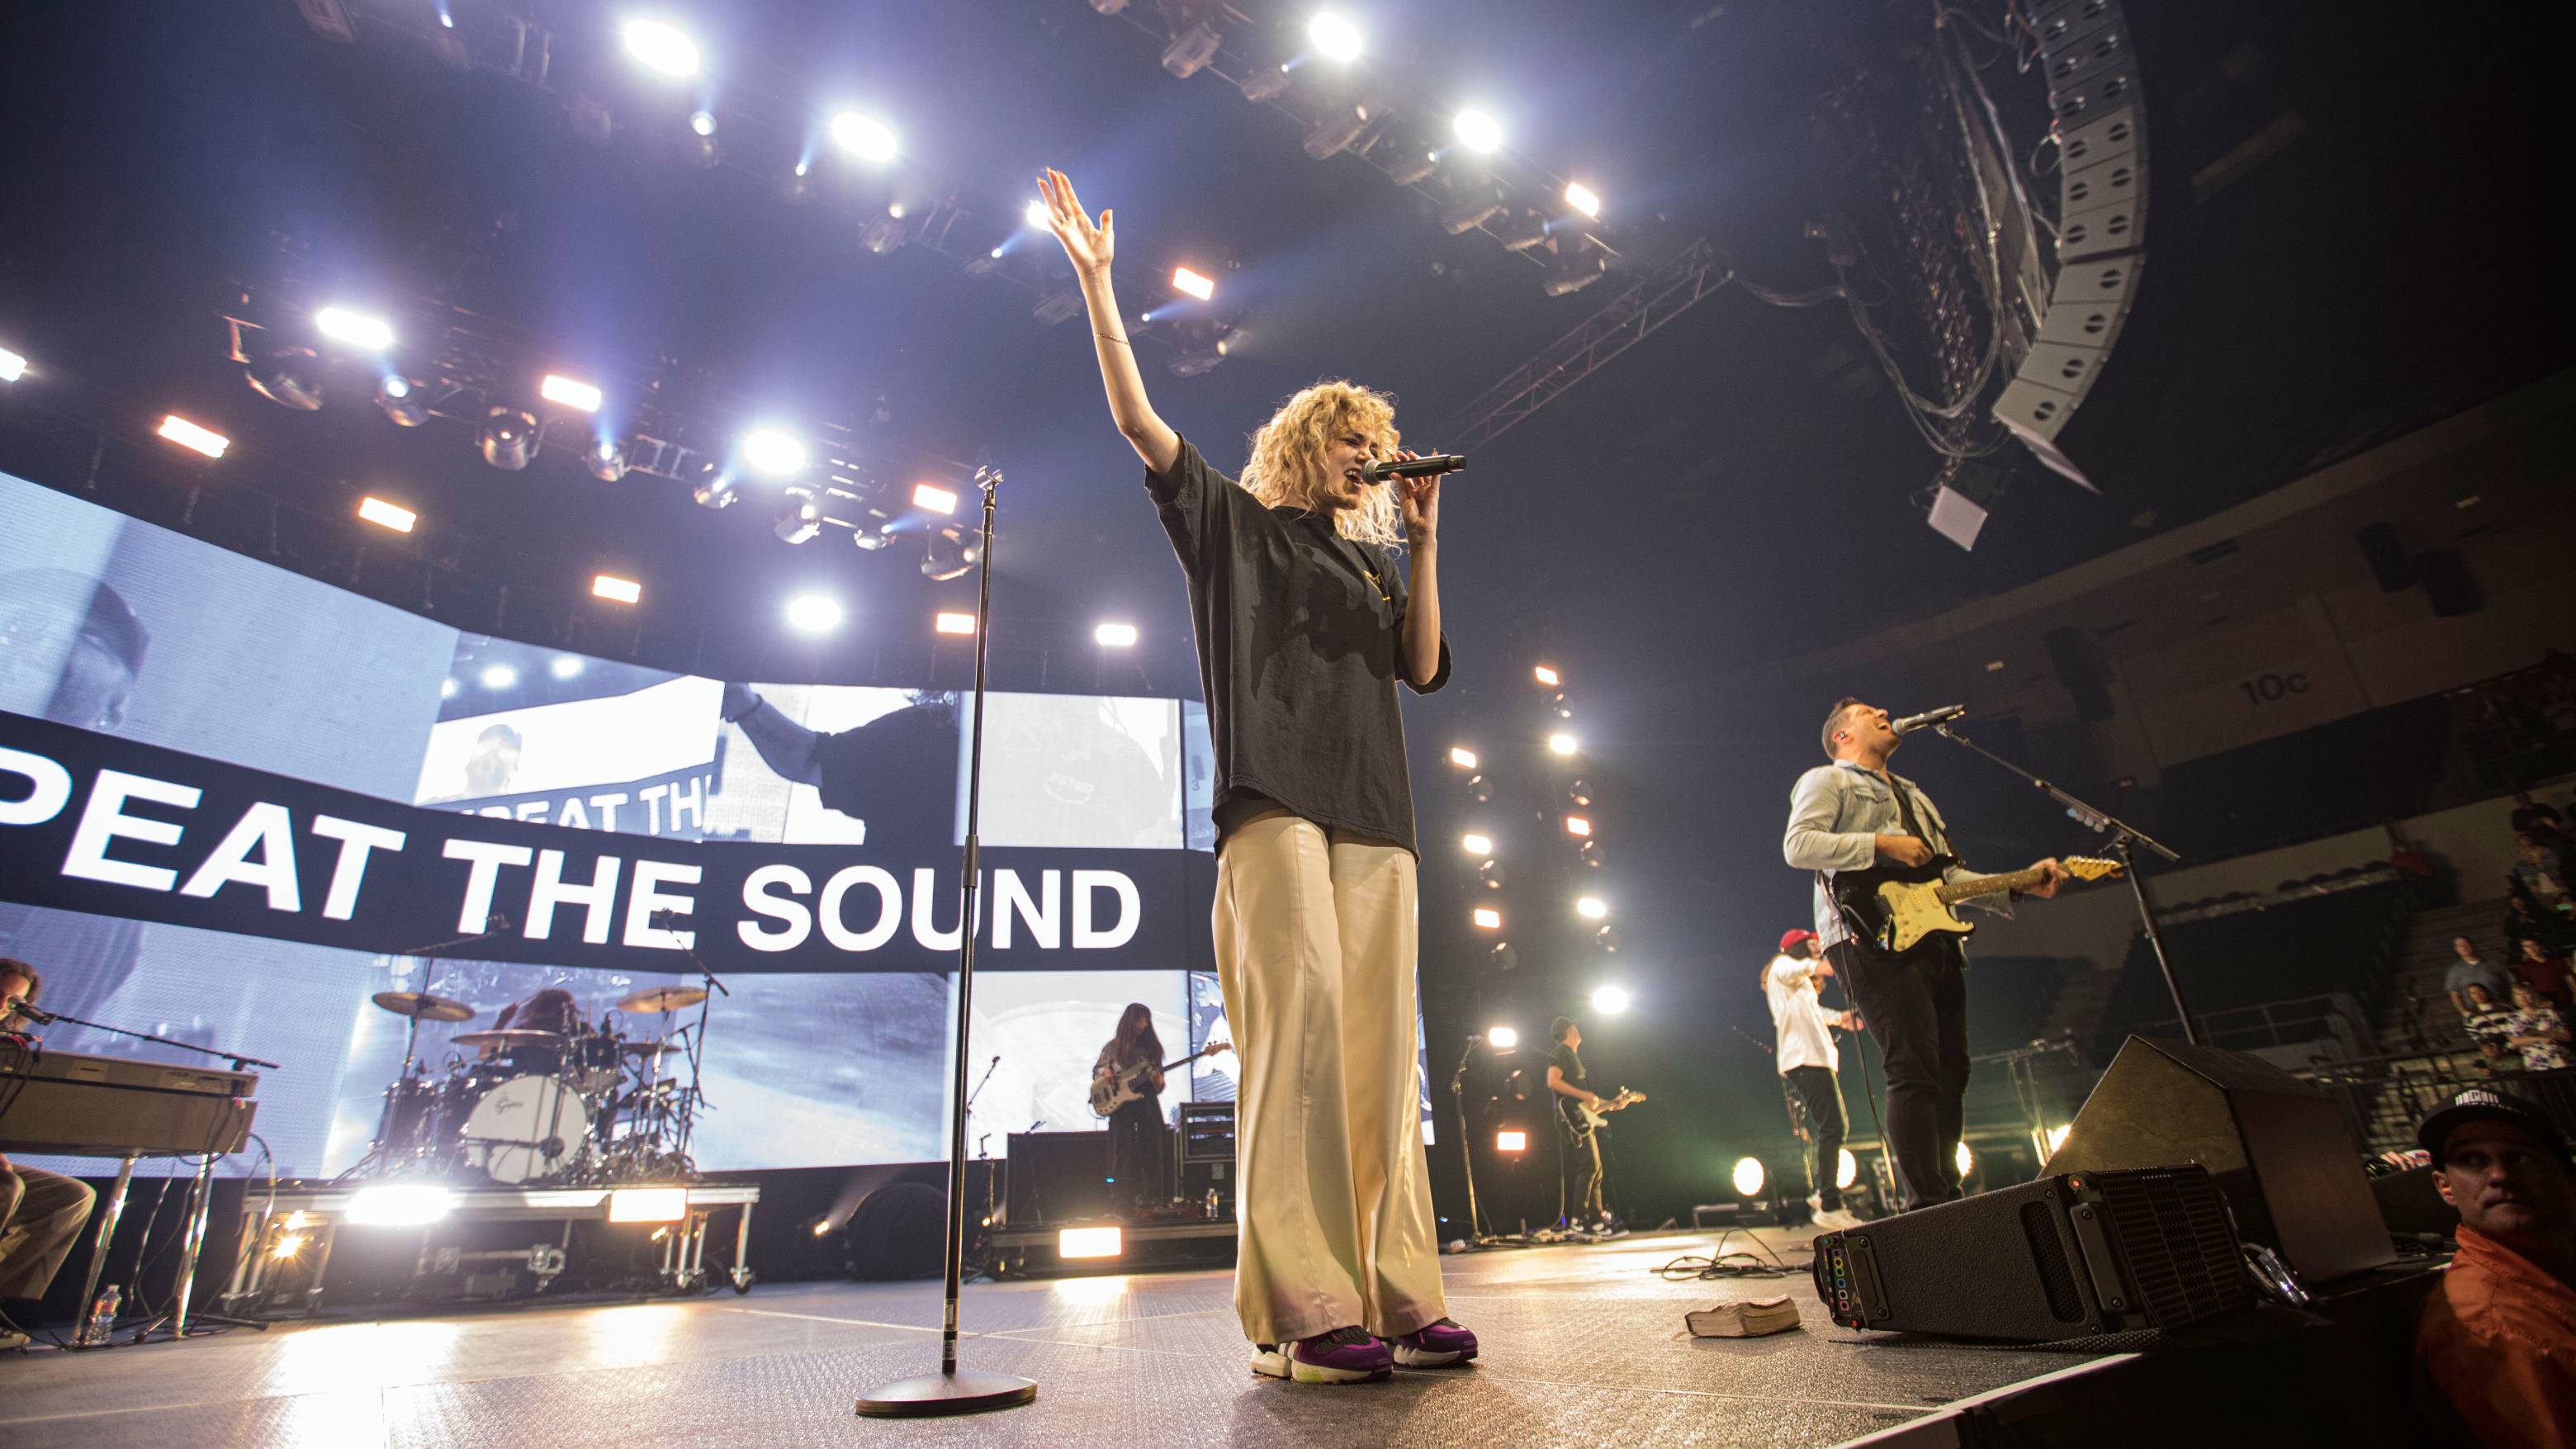 The Secrets of Hillsong' serves as warning to Catholics, too